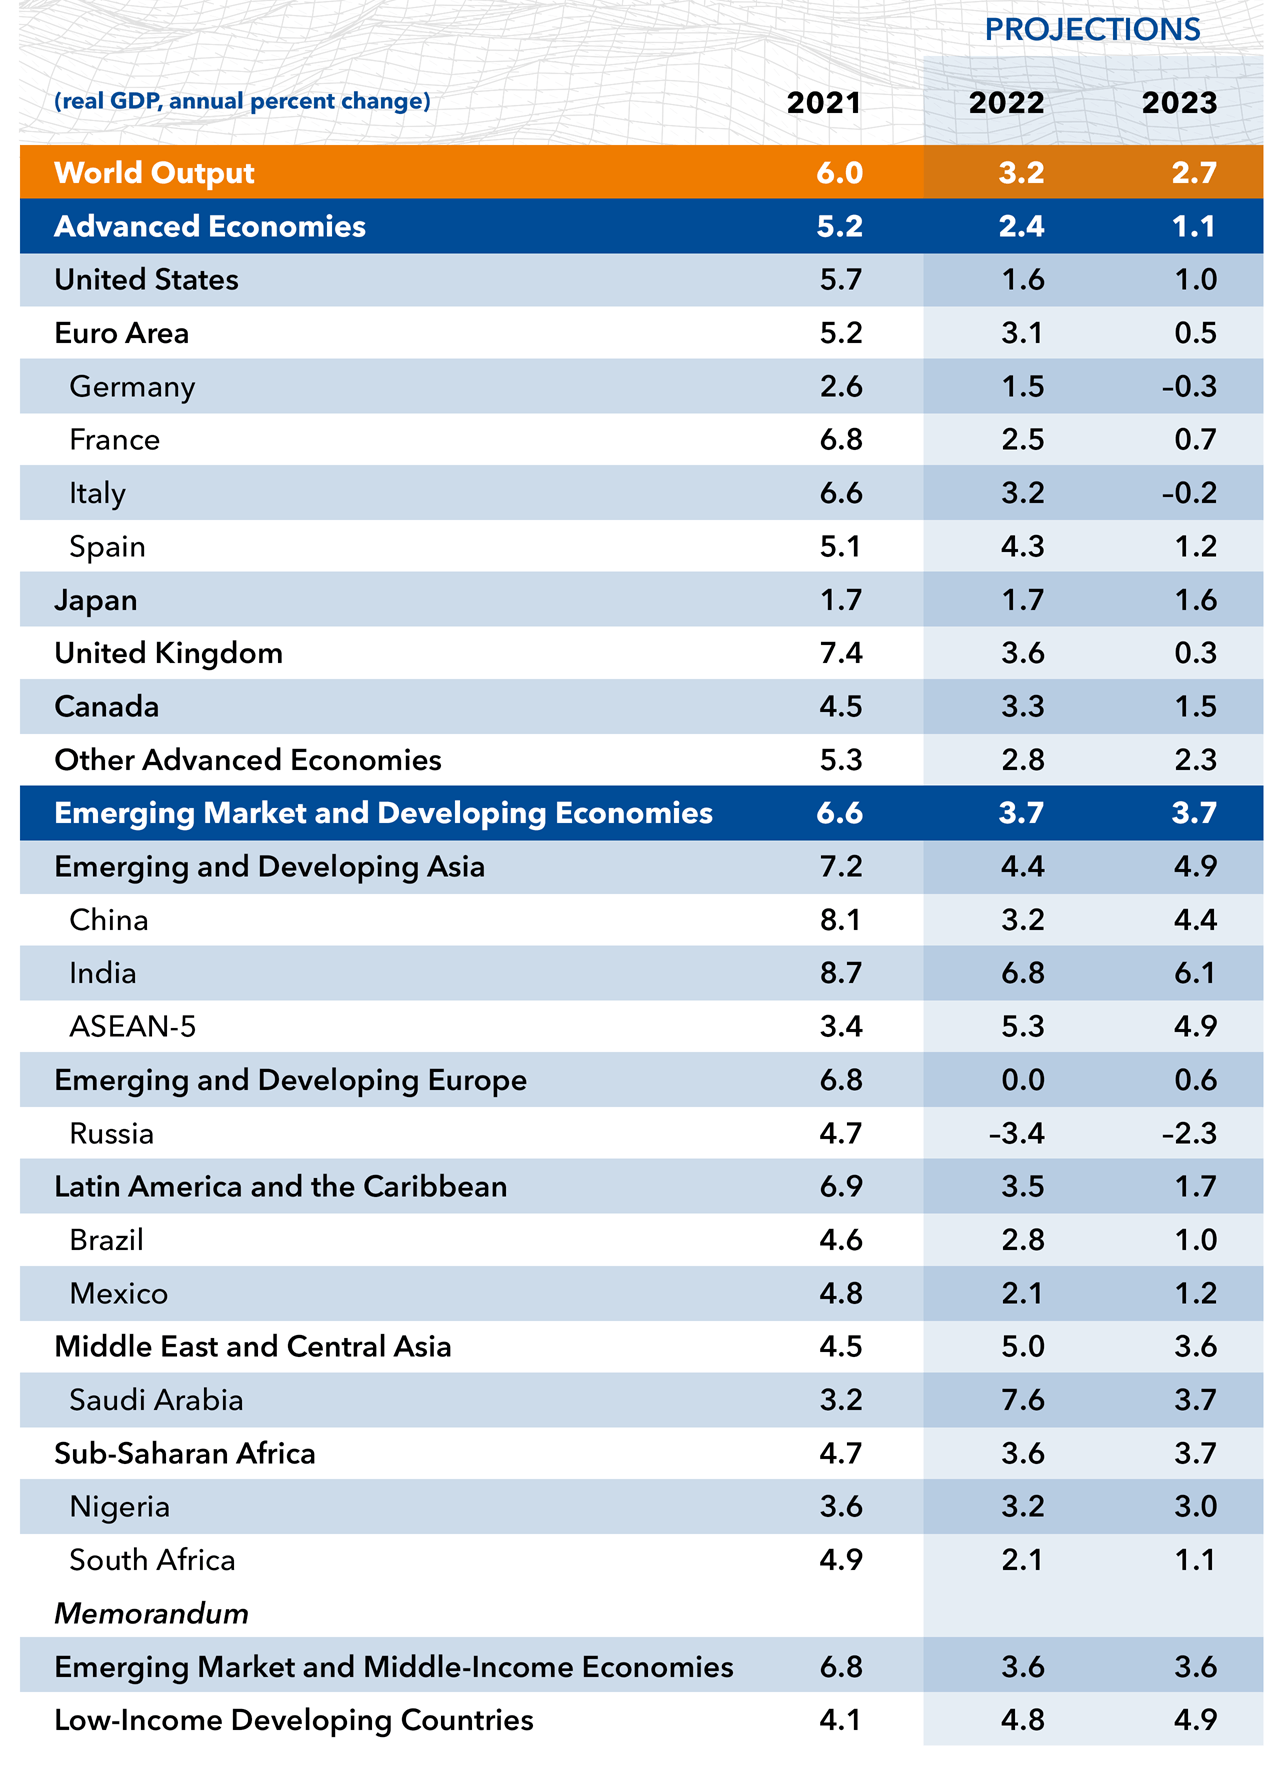 IMF: Global Economic Growth Forecast Lowered to 2.7% in 2023. The Worst Is Yet To Come!